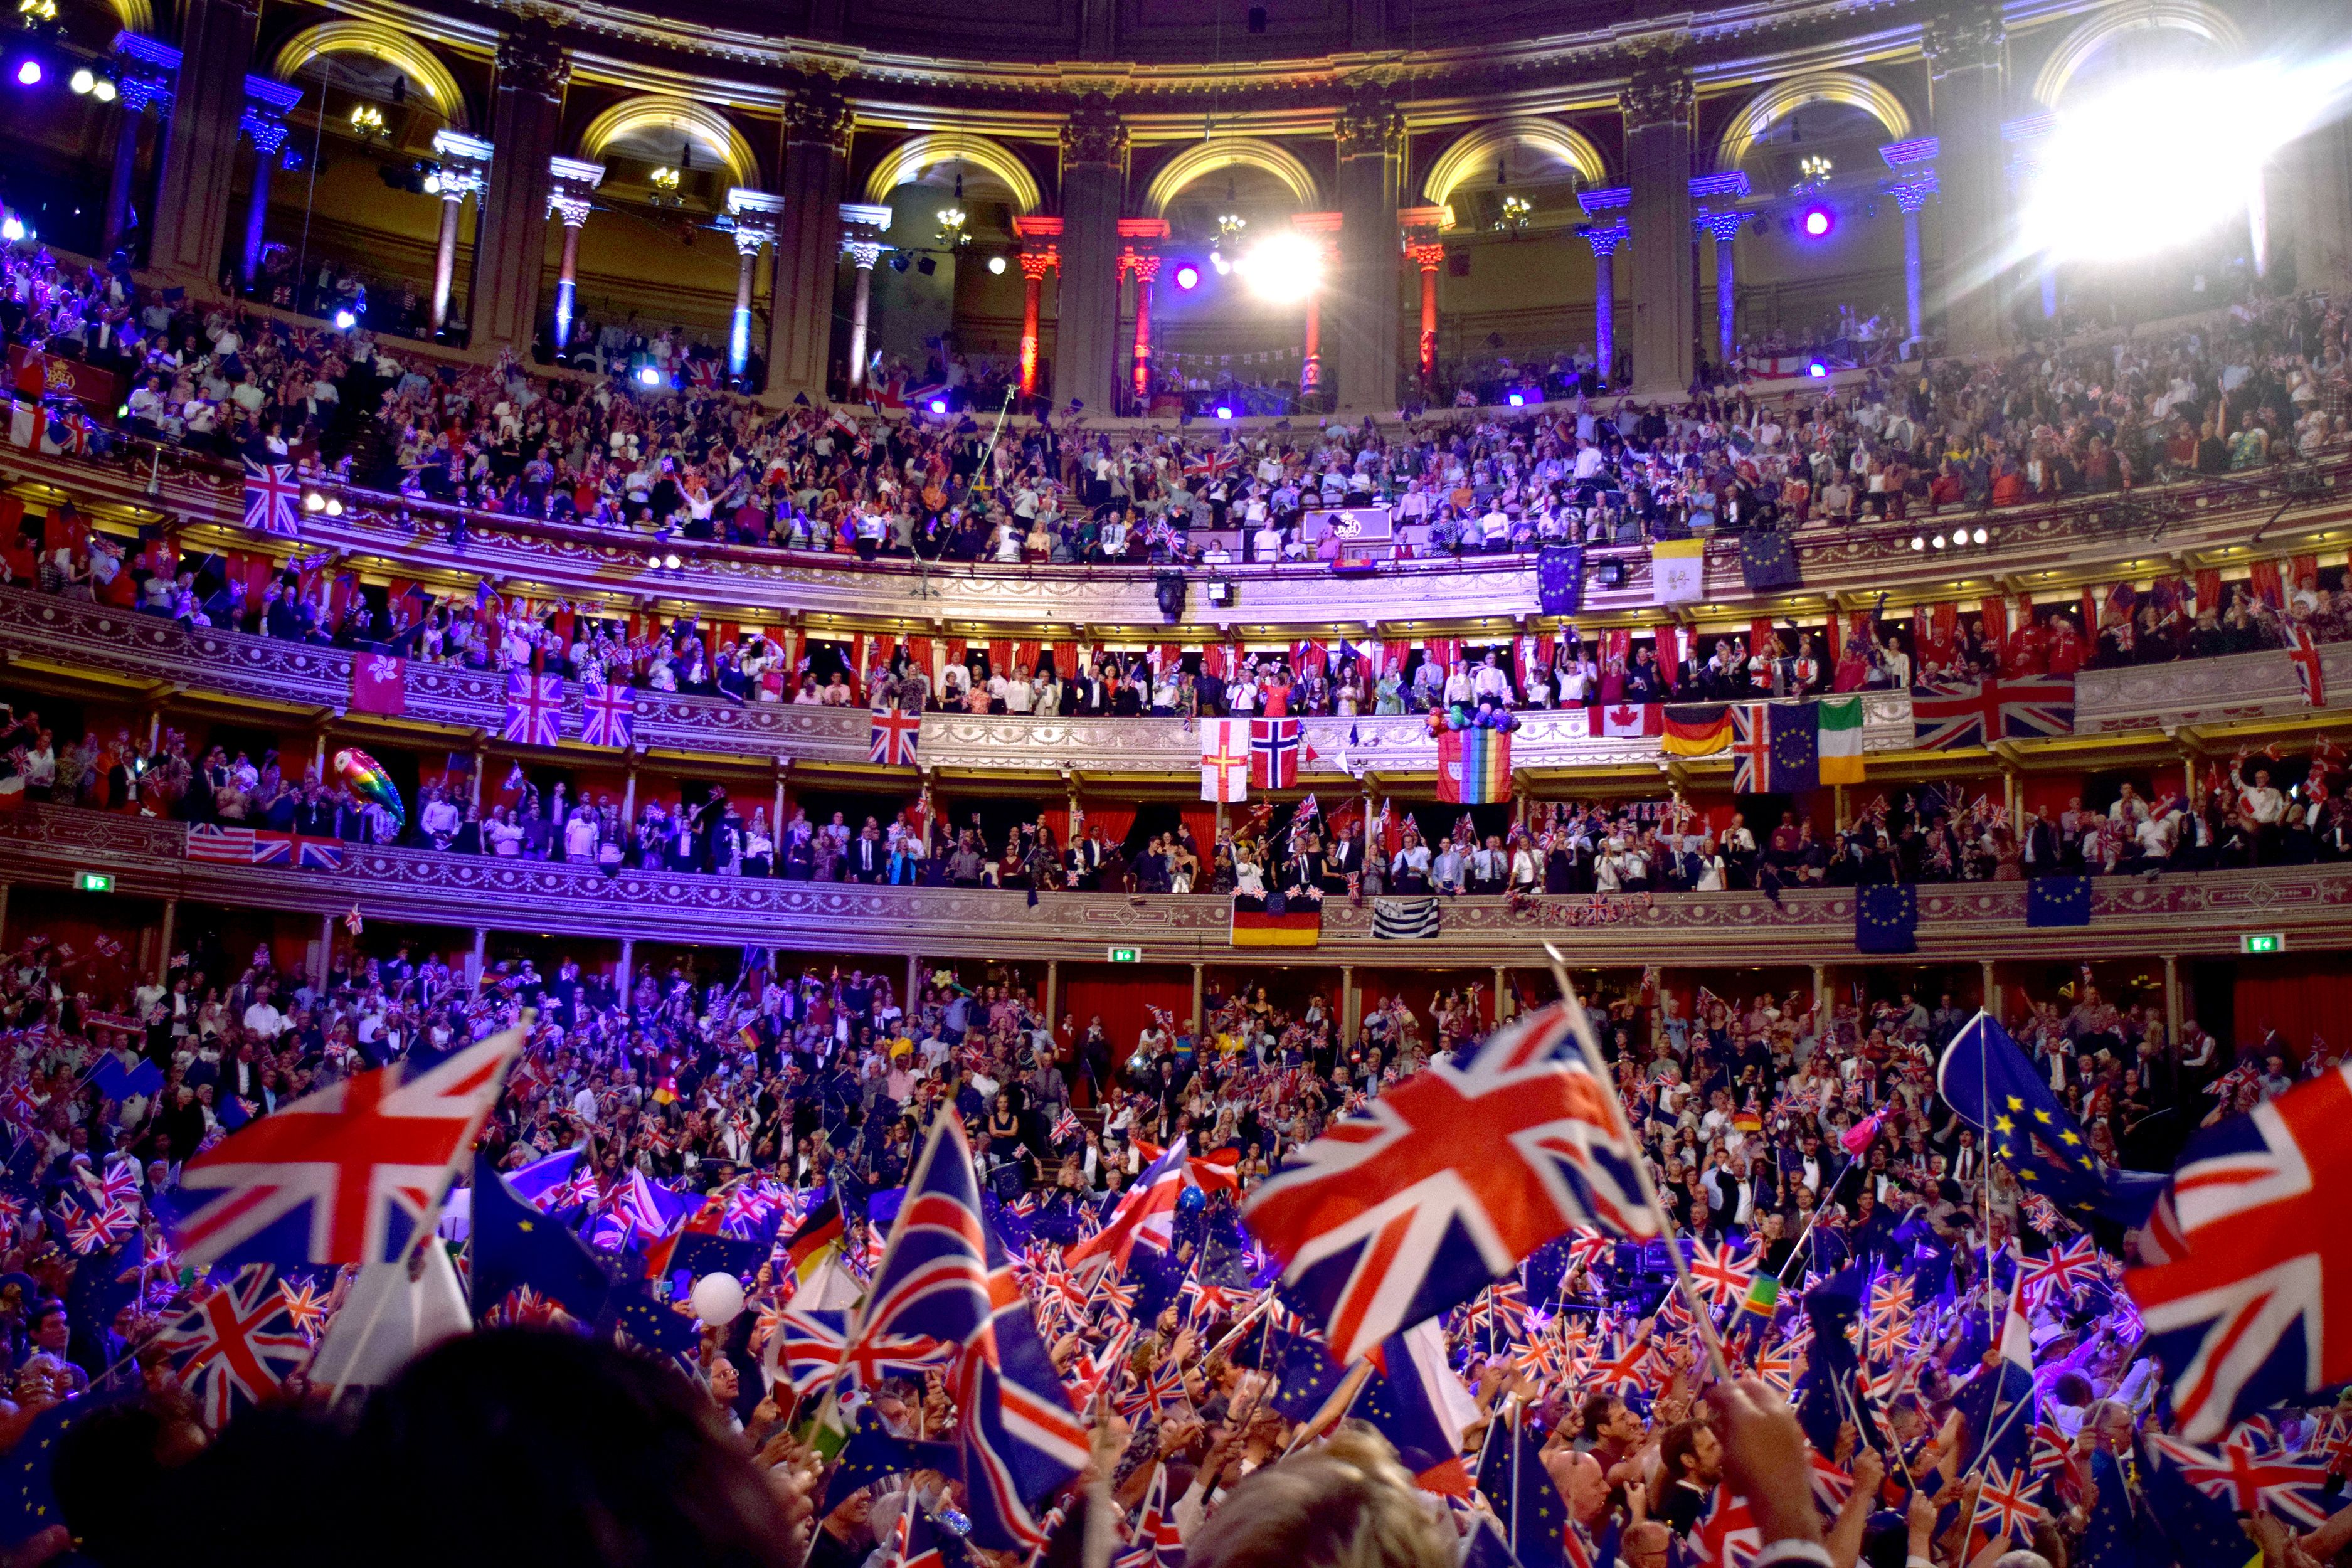 Since 2016, both the union flag and the EU flag have been waved at the Last Night of the Proms